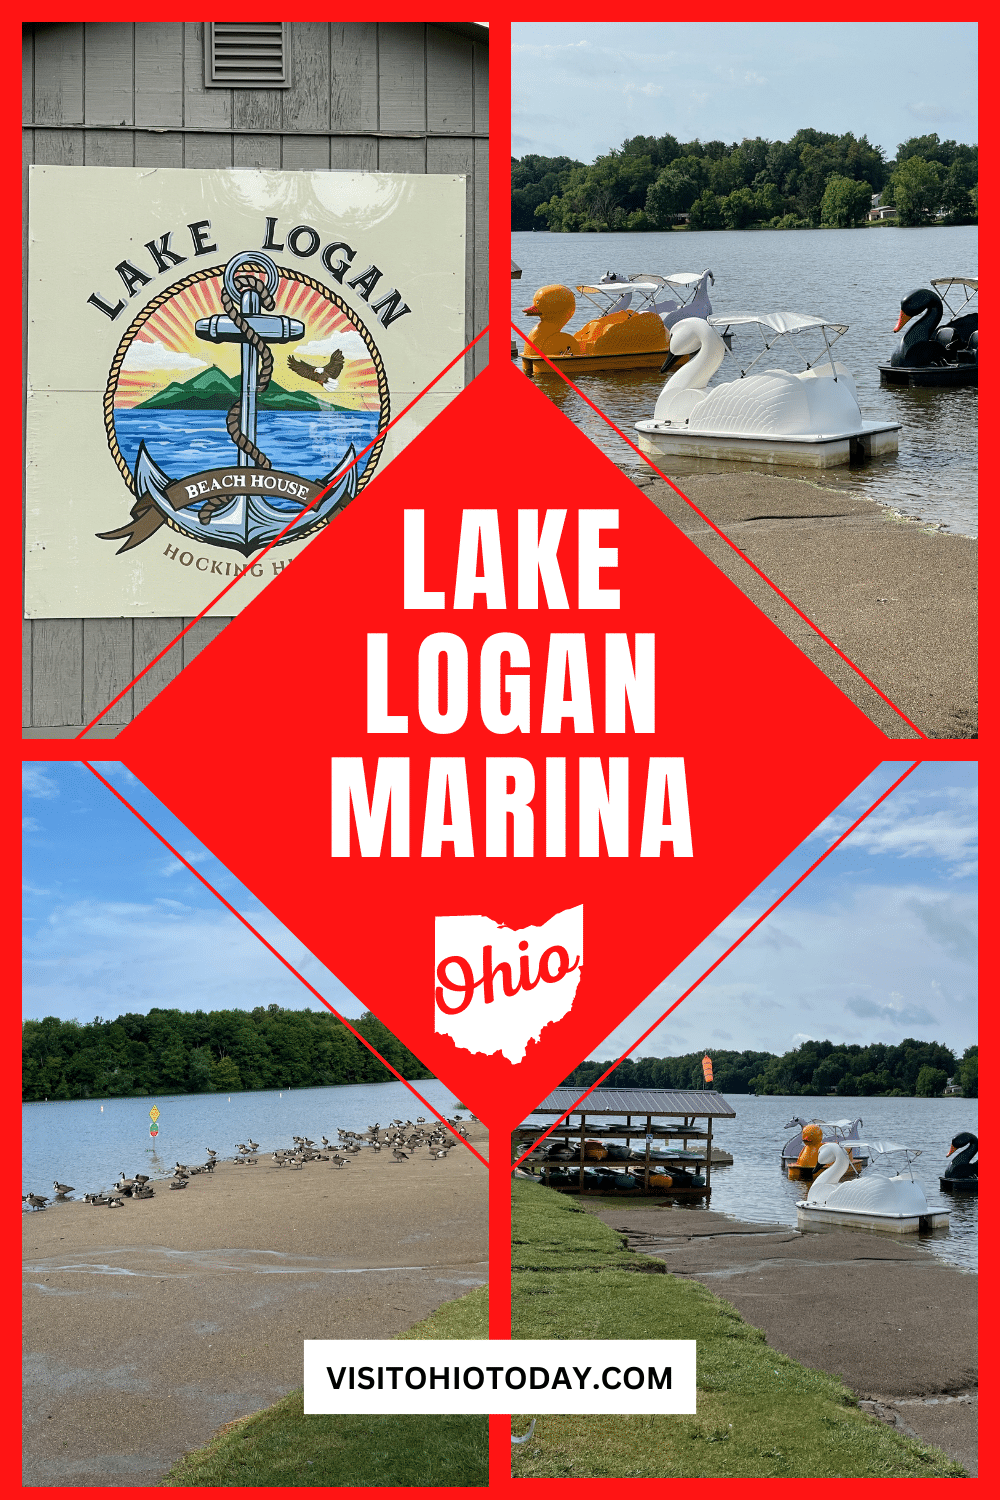 Lake Logan Marina is located at Lake Logan in the Hocking Hills area. Lake Logan is a state park that offers up several types of outdoor recreation. #pedalboats #hockinghills #loganohio #marina #ohio